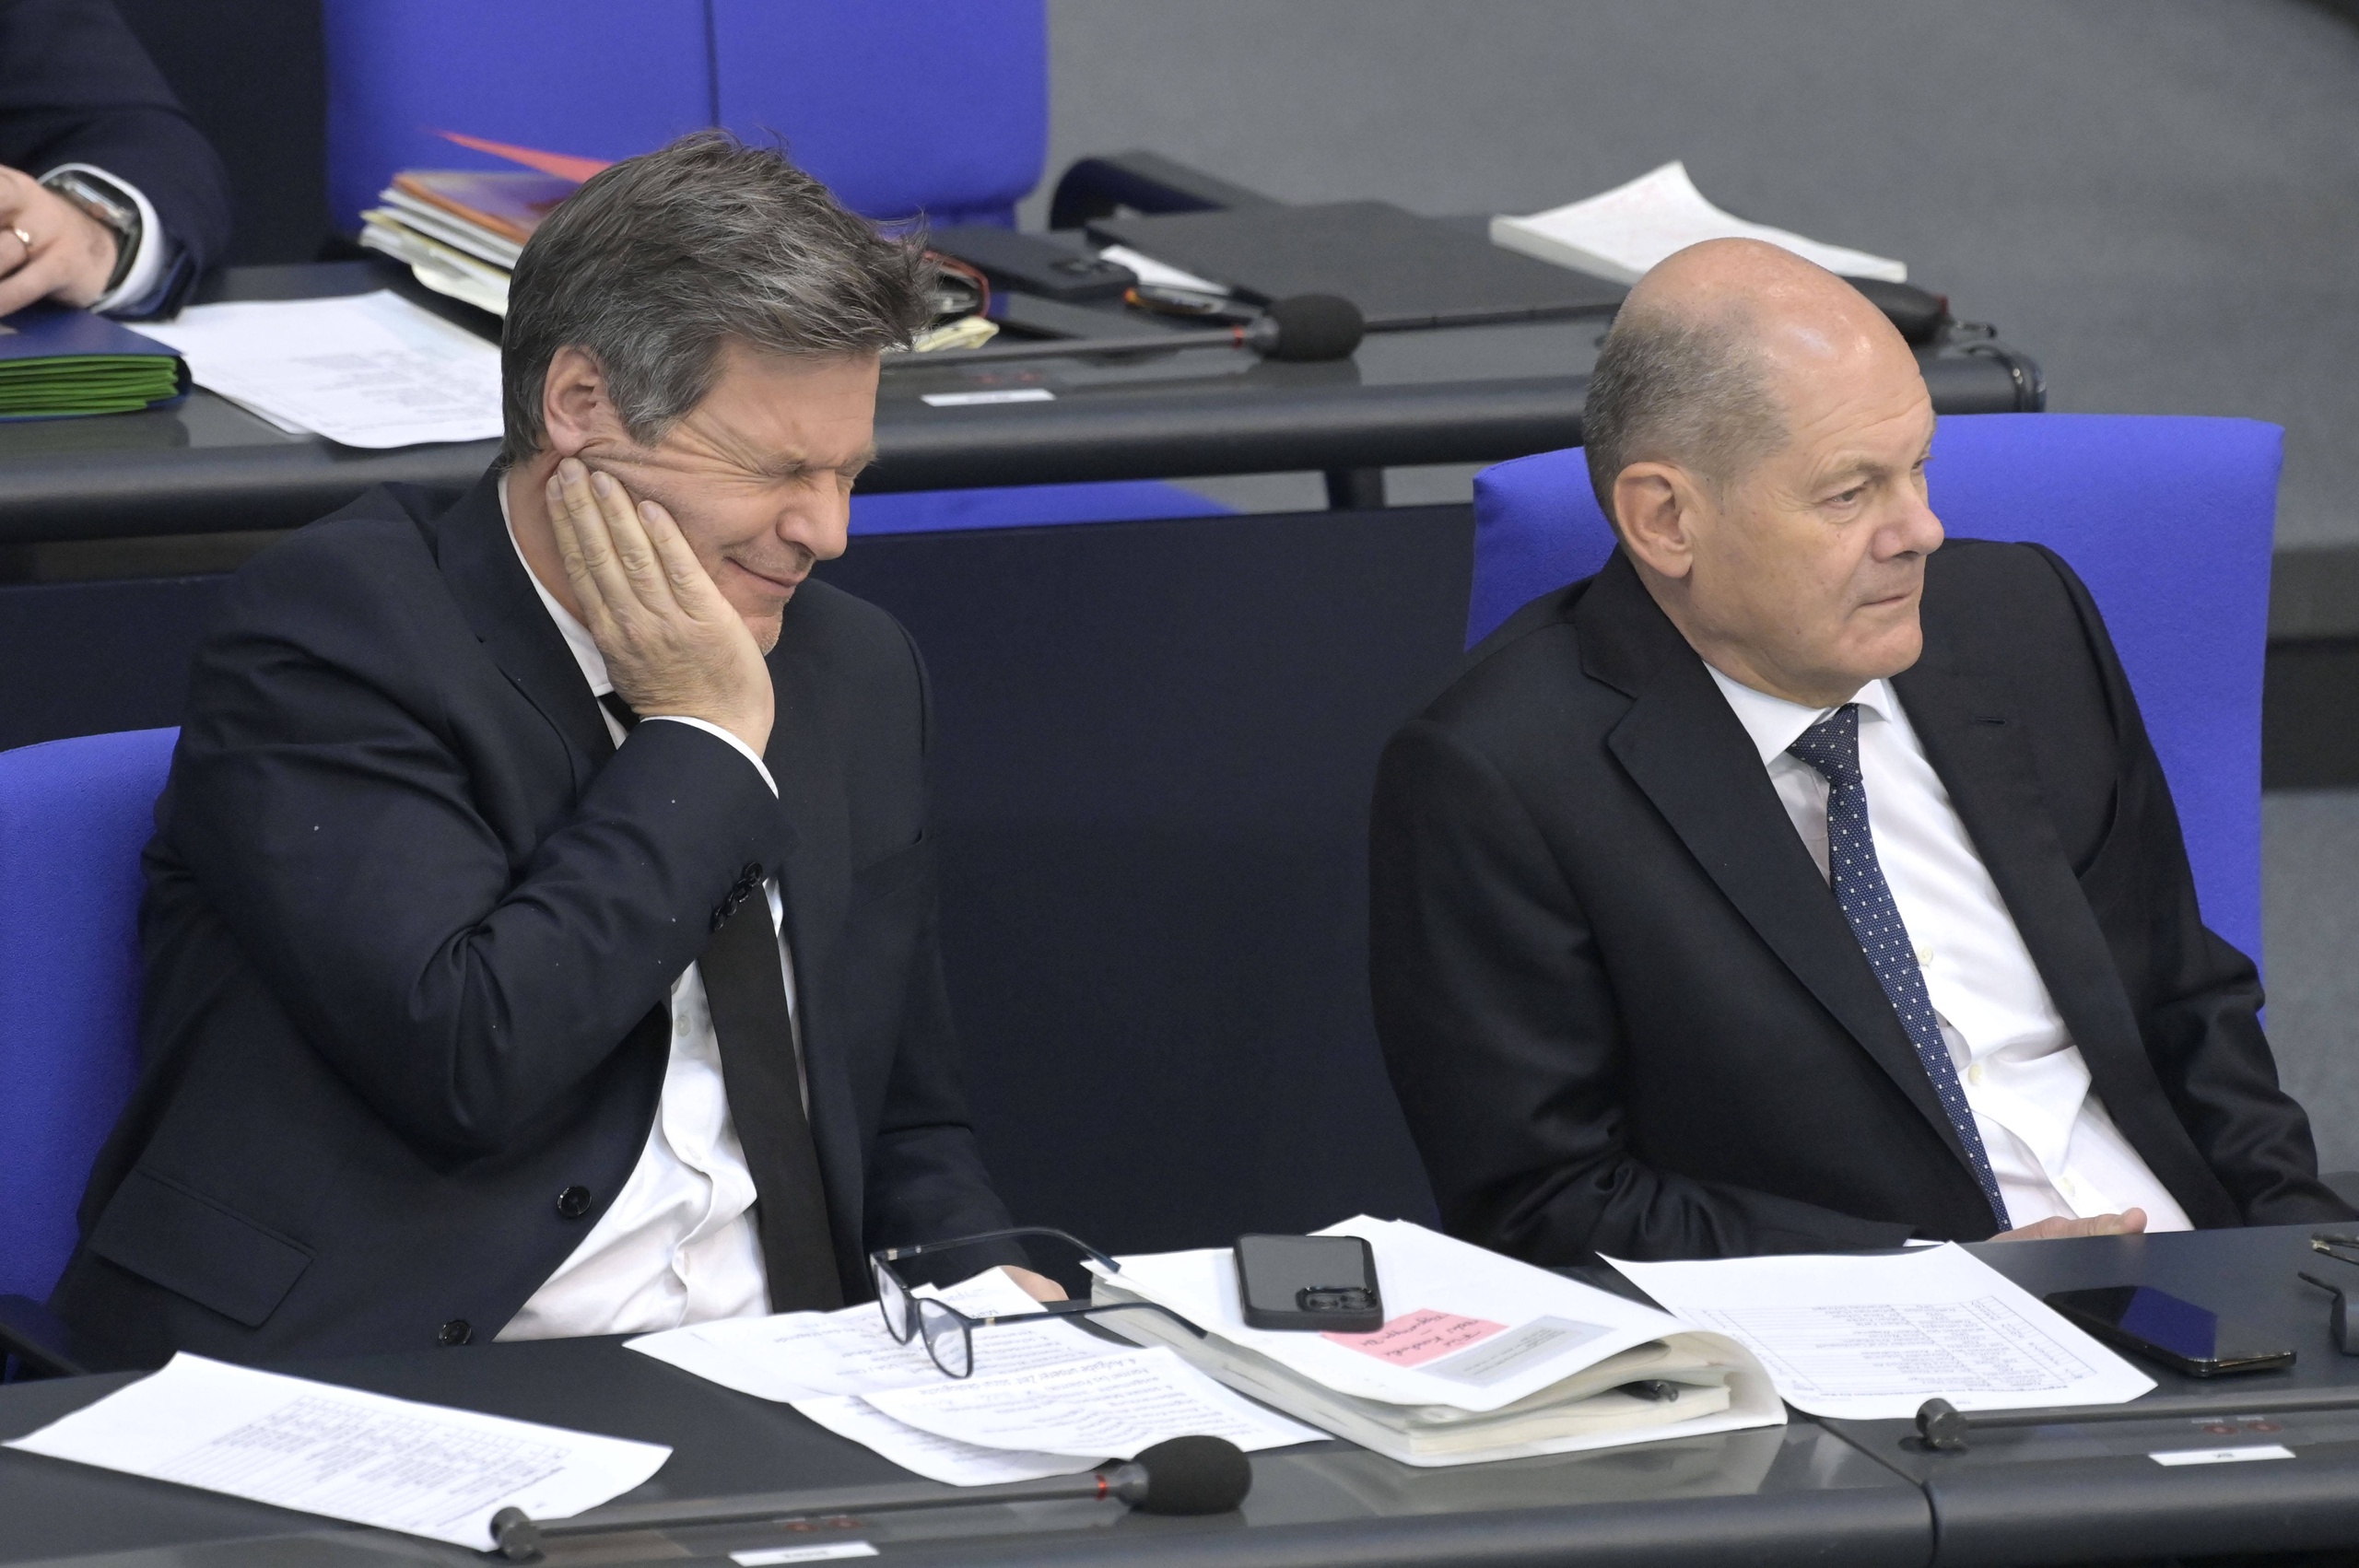 The Minister of Economic Affairs and Climate Protection Robert Habeck and Chancellor Olaf Scholz.  According to the German Bundesbank, the economic outlook for Germany is slightly better